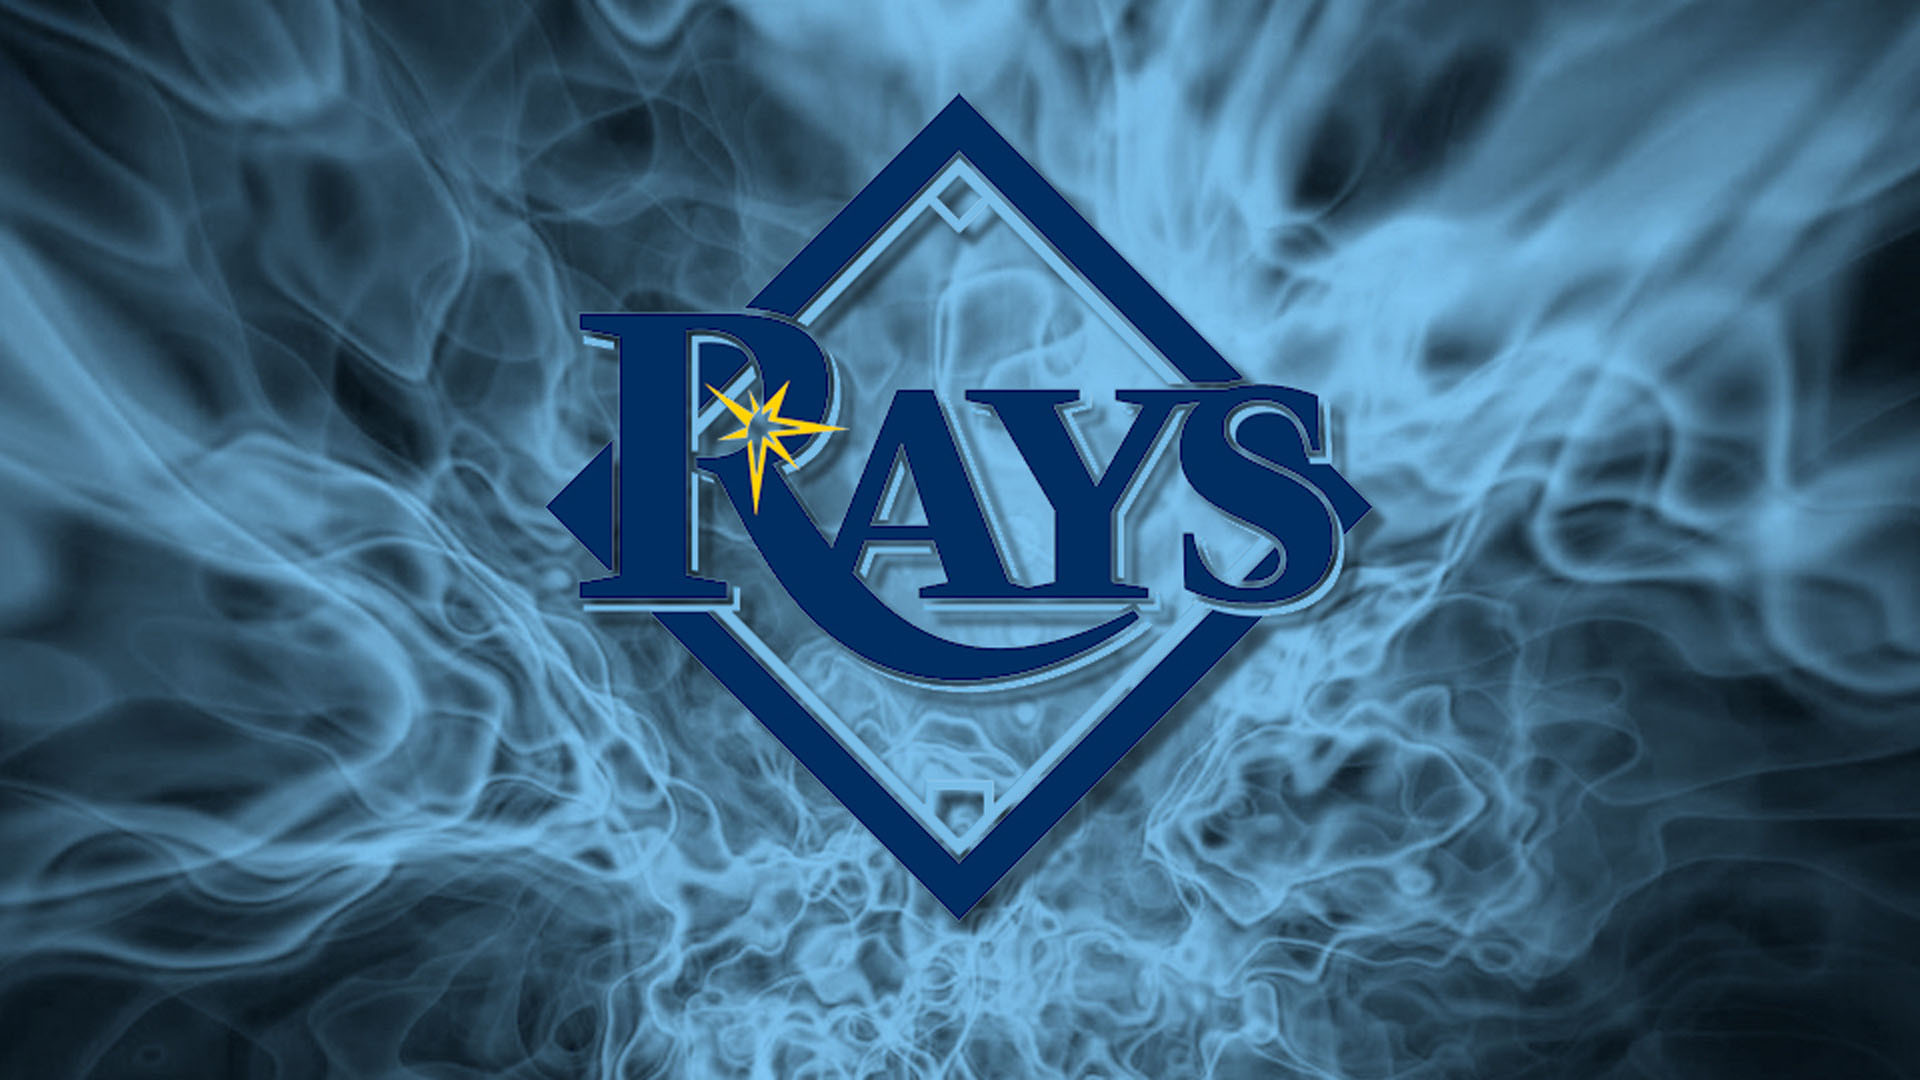 Tampa Bay Rays Wallpapers Images Photos Pictures Backgrounds HD Wallpapers Download Free Images Wallpaper [wallpaper981.blogspot.com]